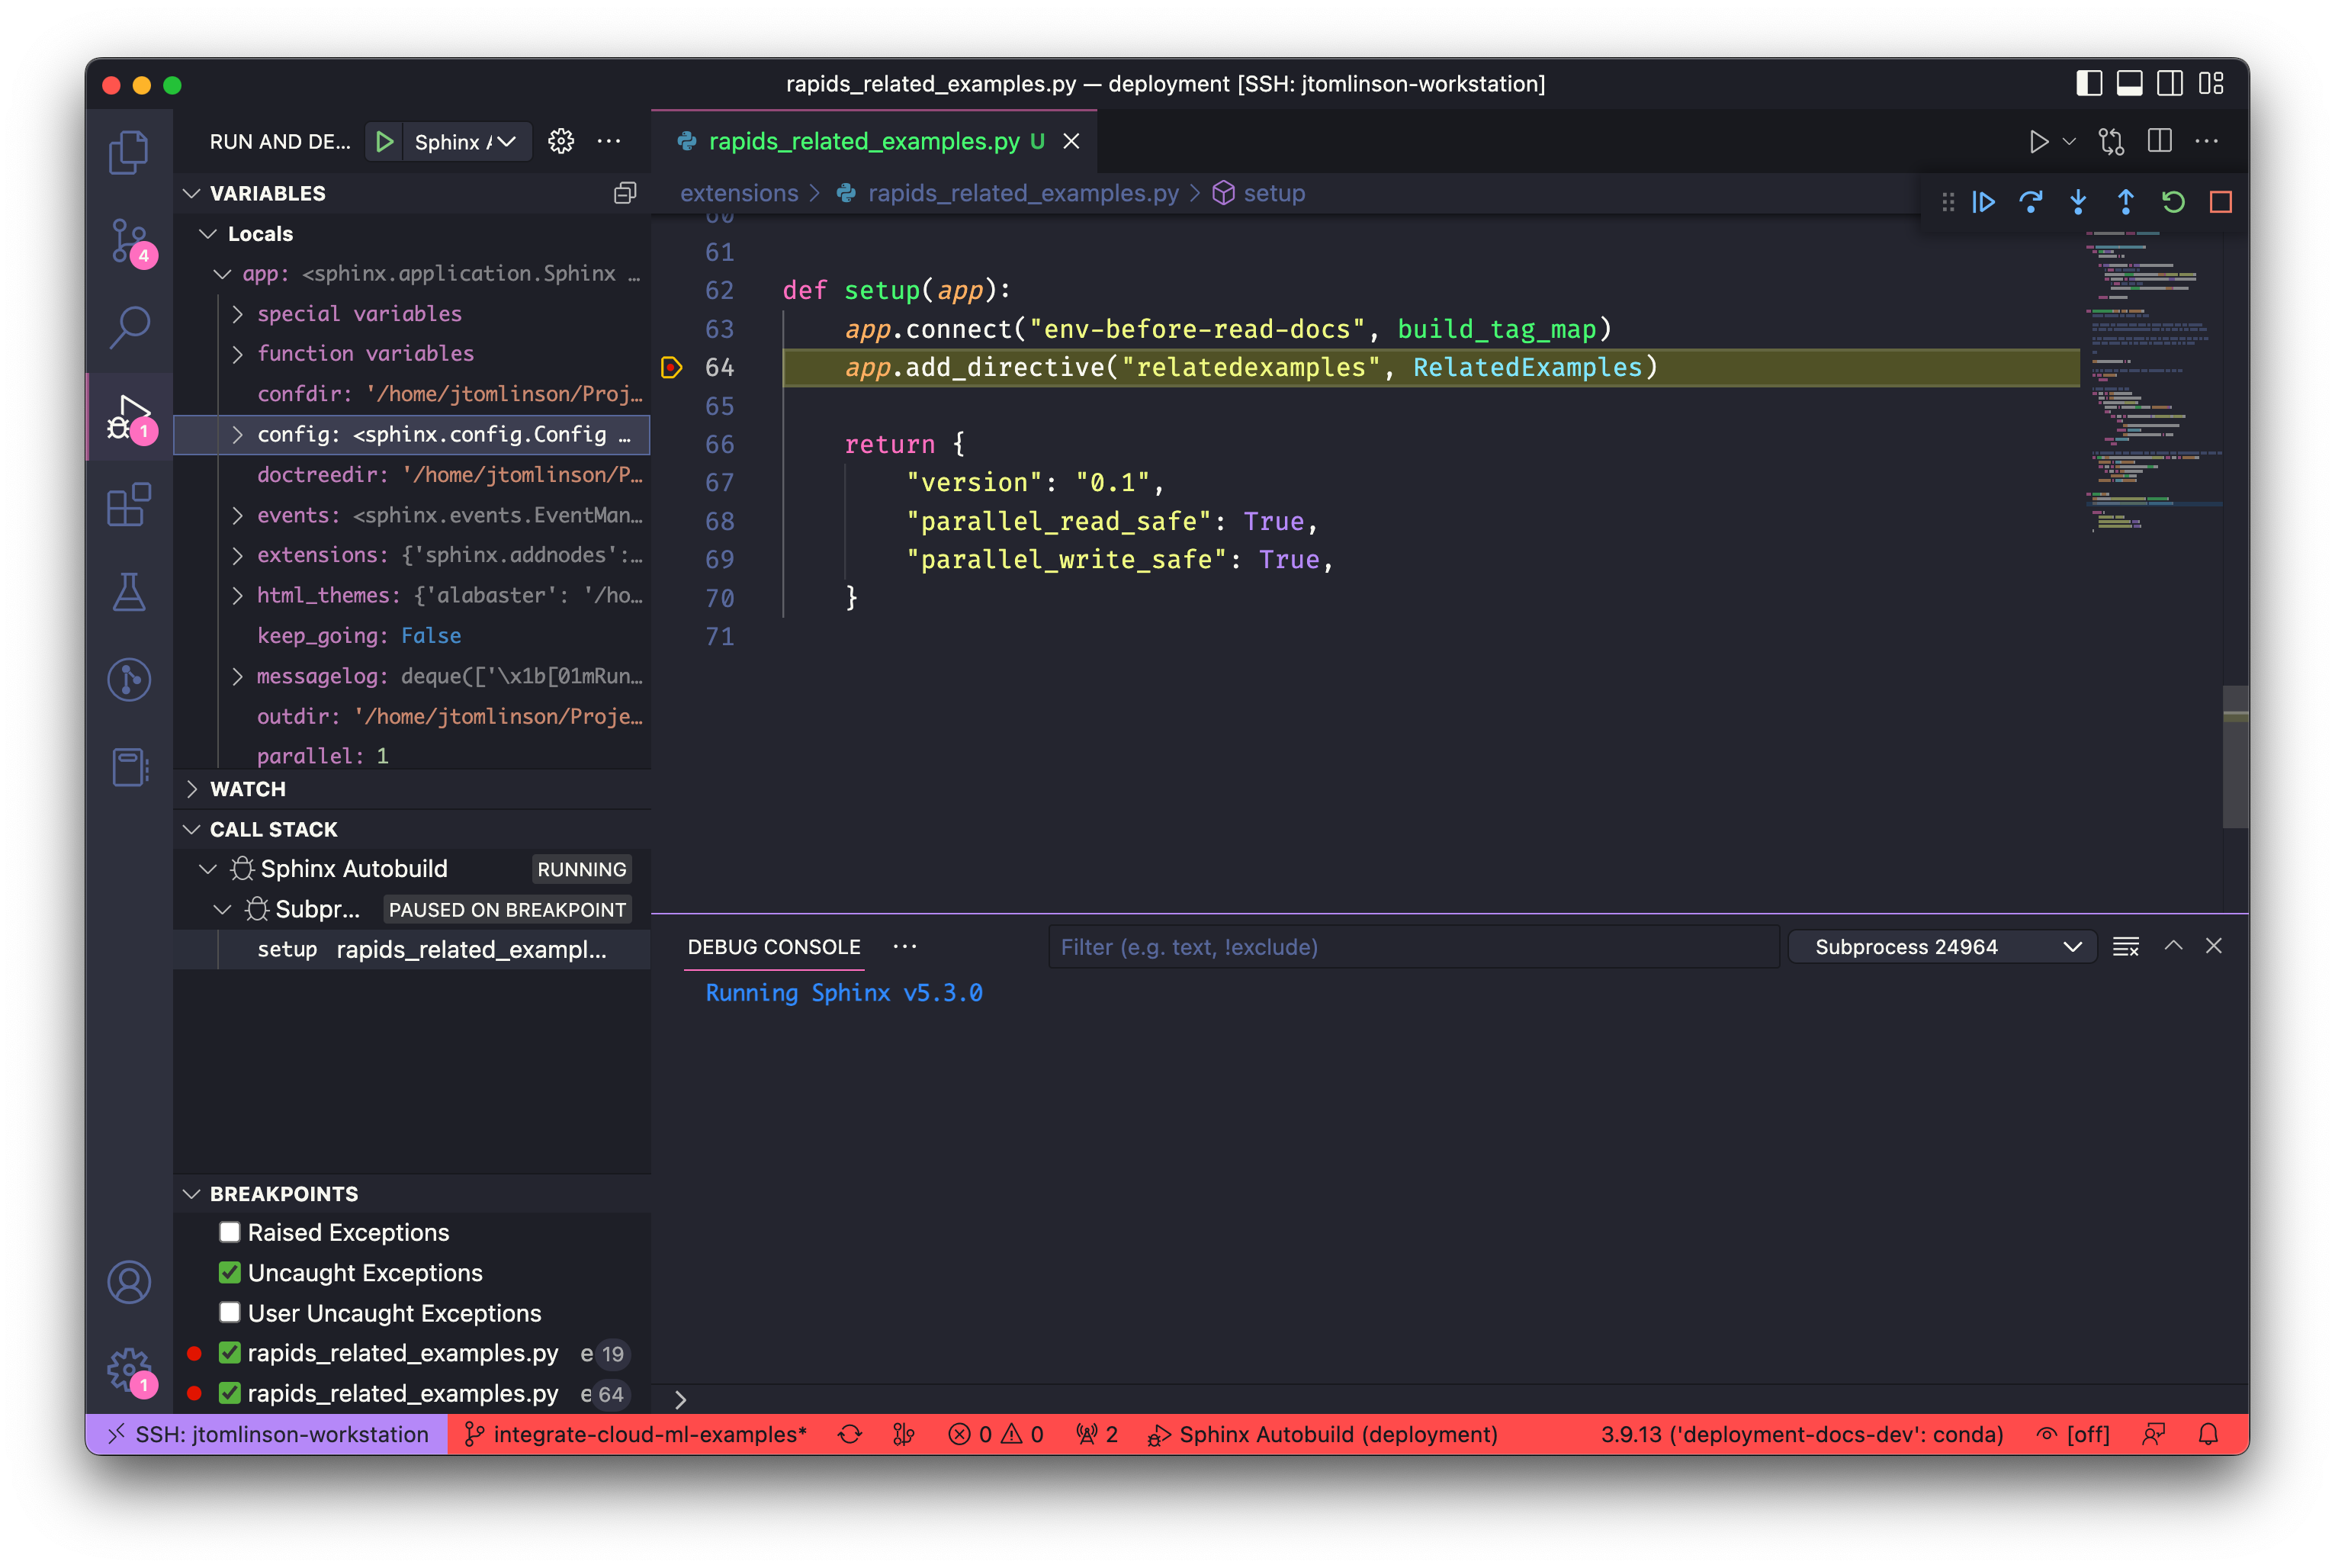 VSCode window showing the debugger paused on a breakpoint in a custom extension